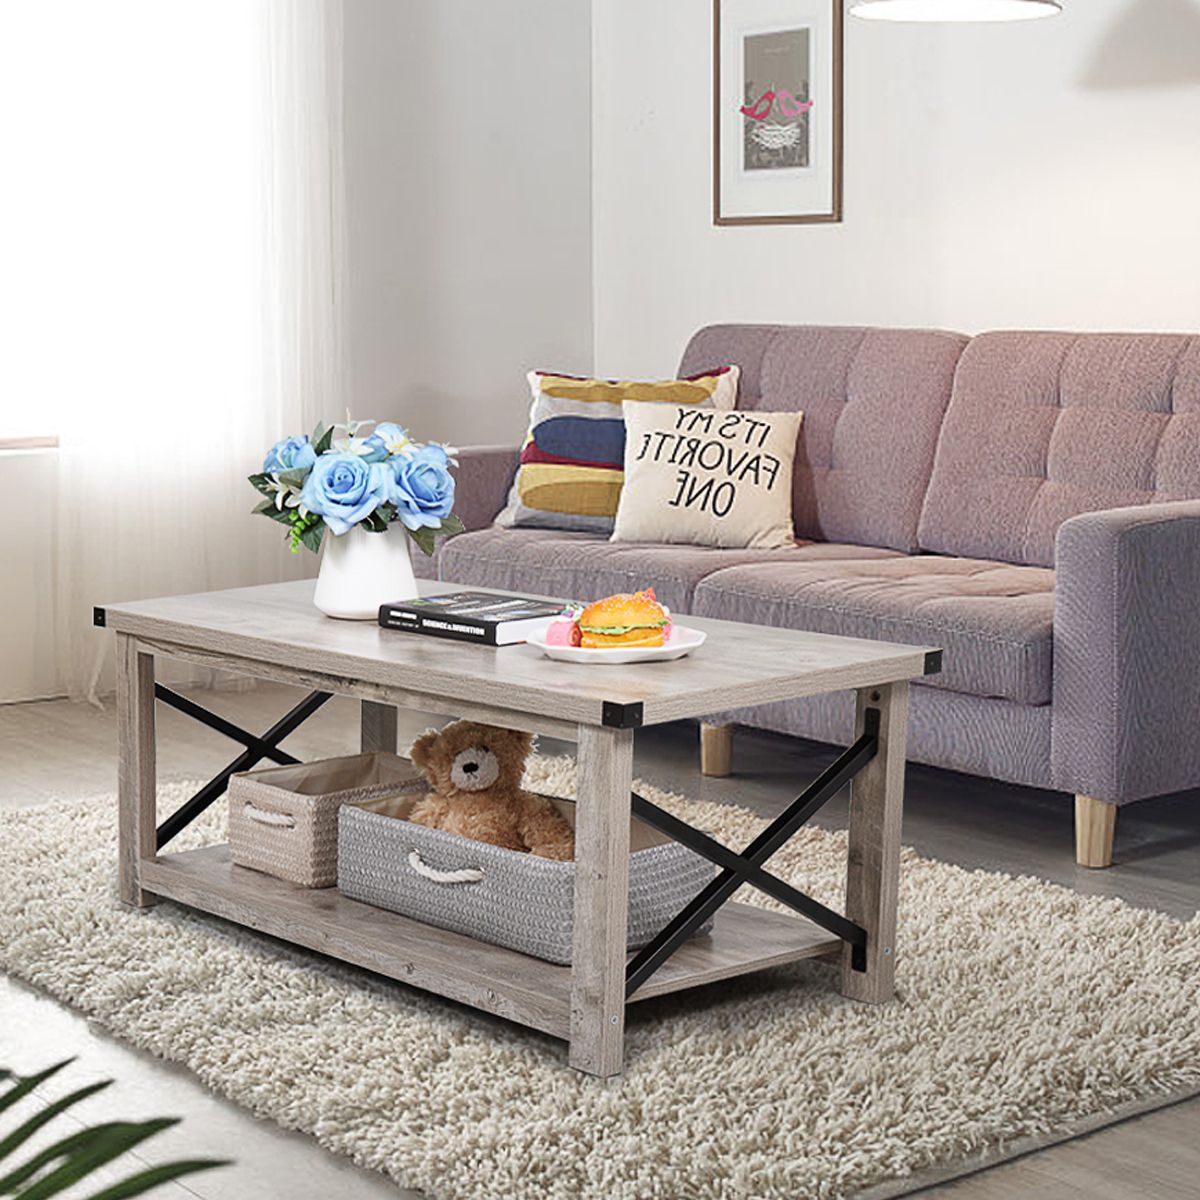 2019 Black Wood Storage Coffee Tables Within Jaxpety Metal X Frame Coffee Table Wood Rectangle Coffee (Gallery 3 of 20)